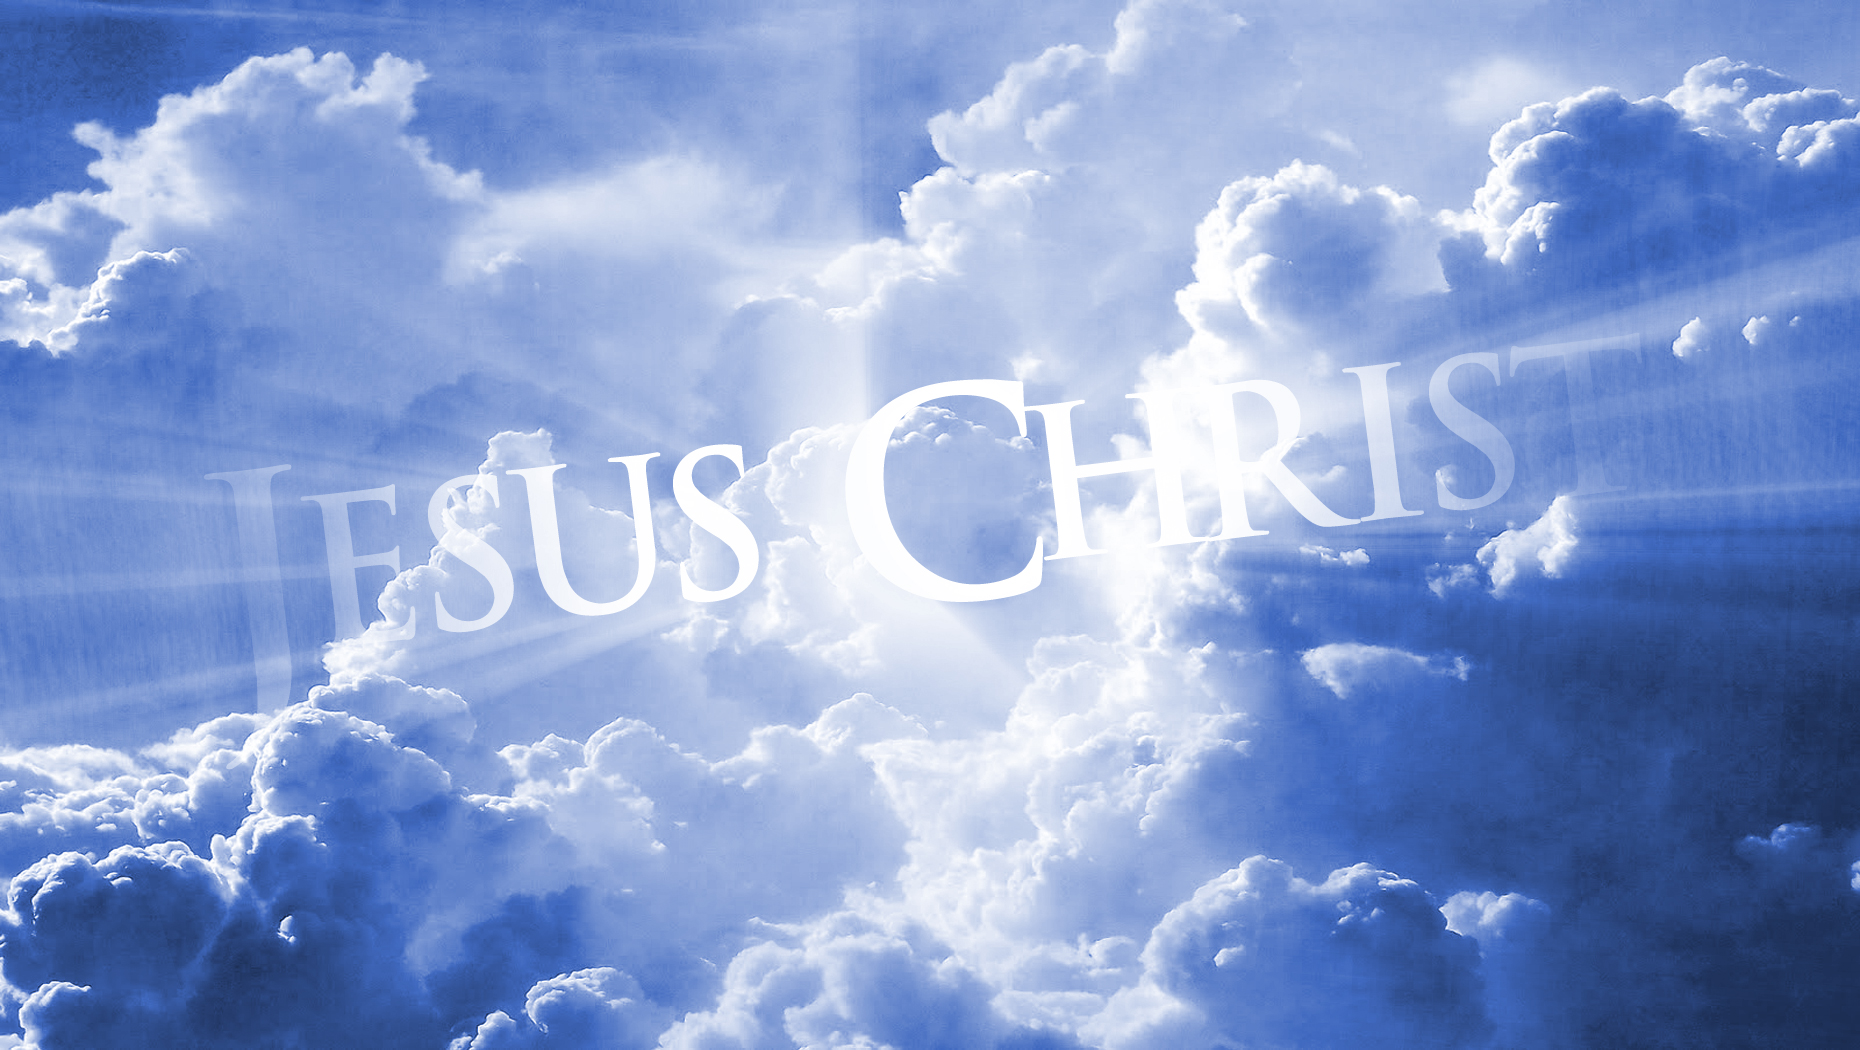 Jesus Christ in Heaven Wallpaper   Christian Wallpapers and 1860x1050